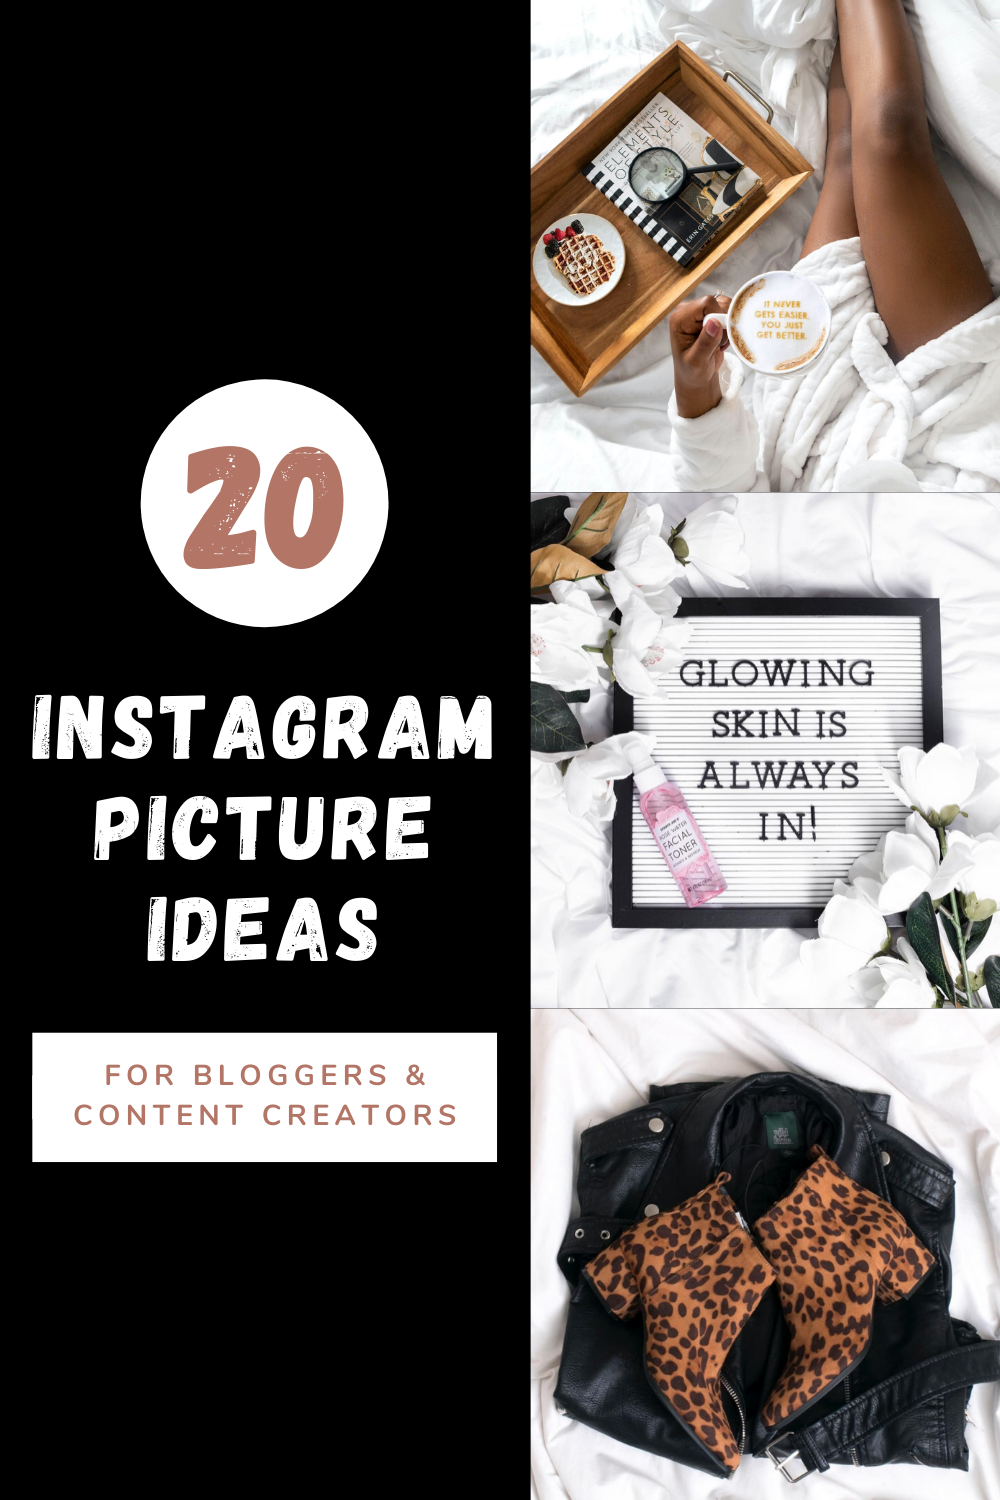 Instagram Picture Ideas for Bloggers and Content Creators